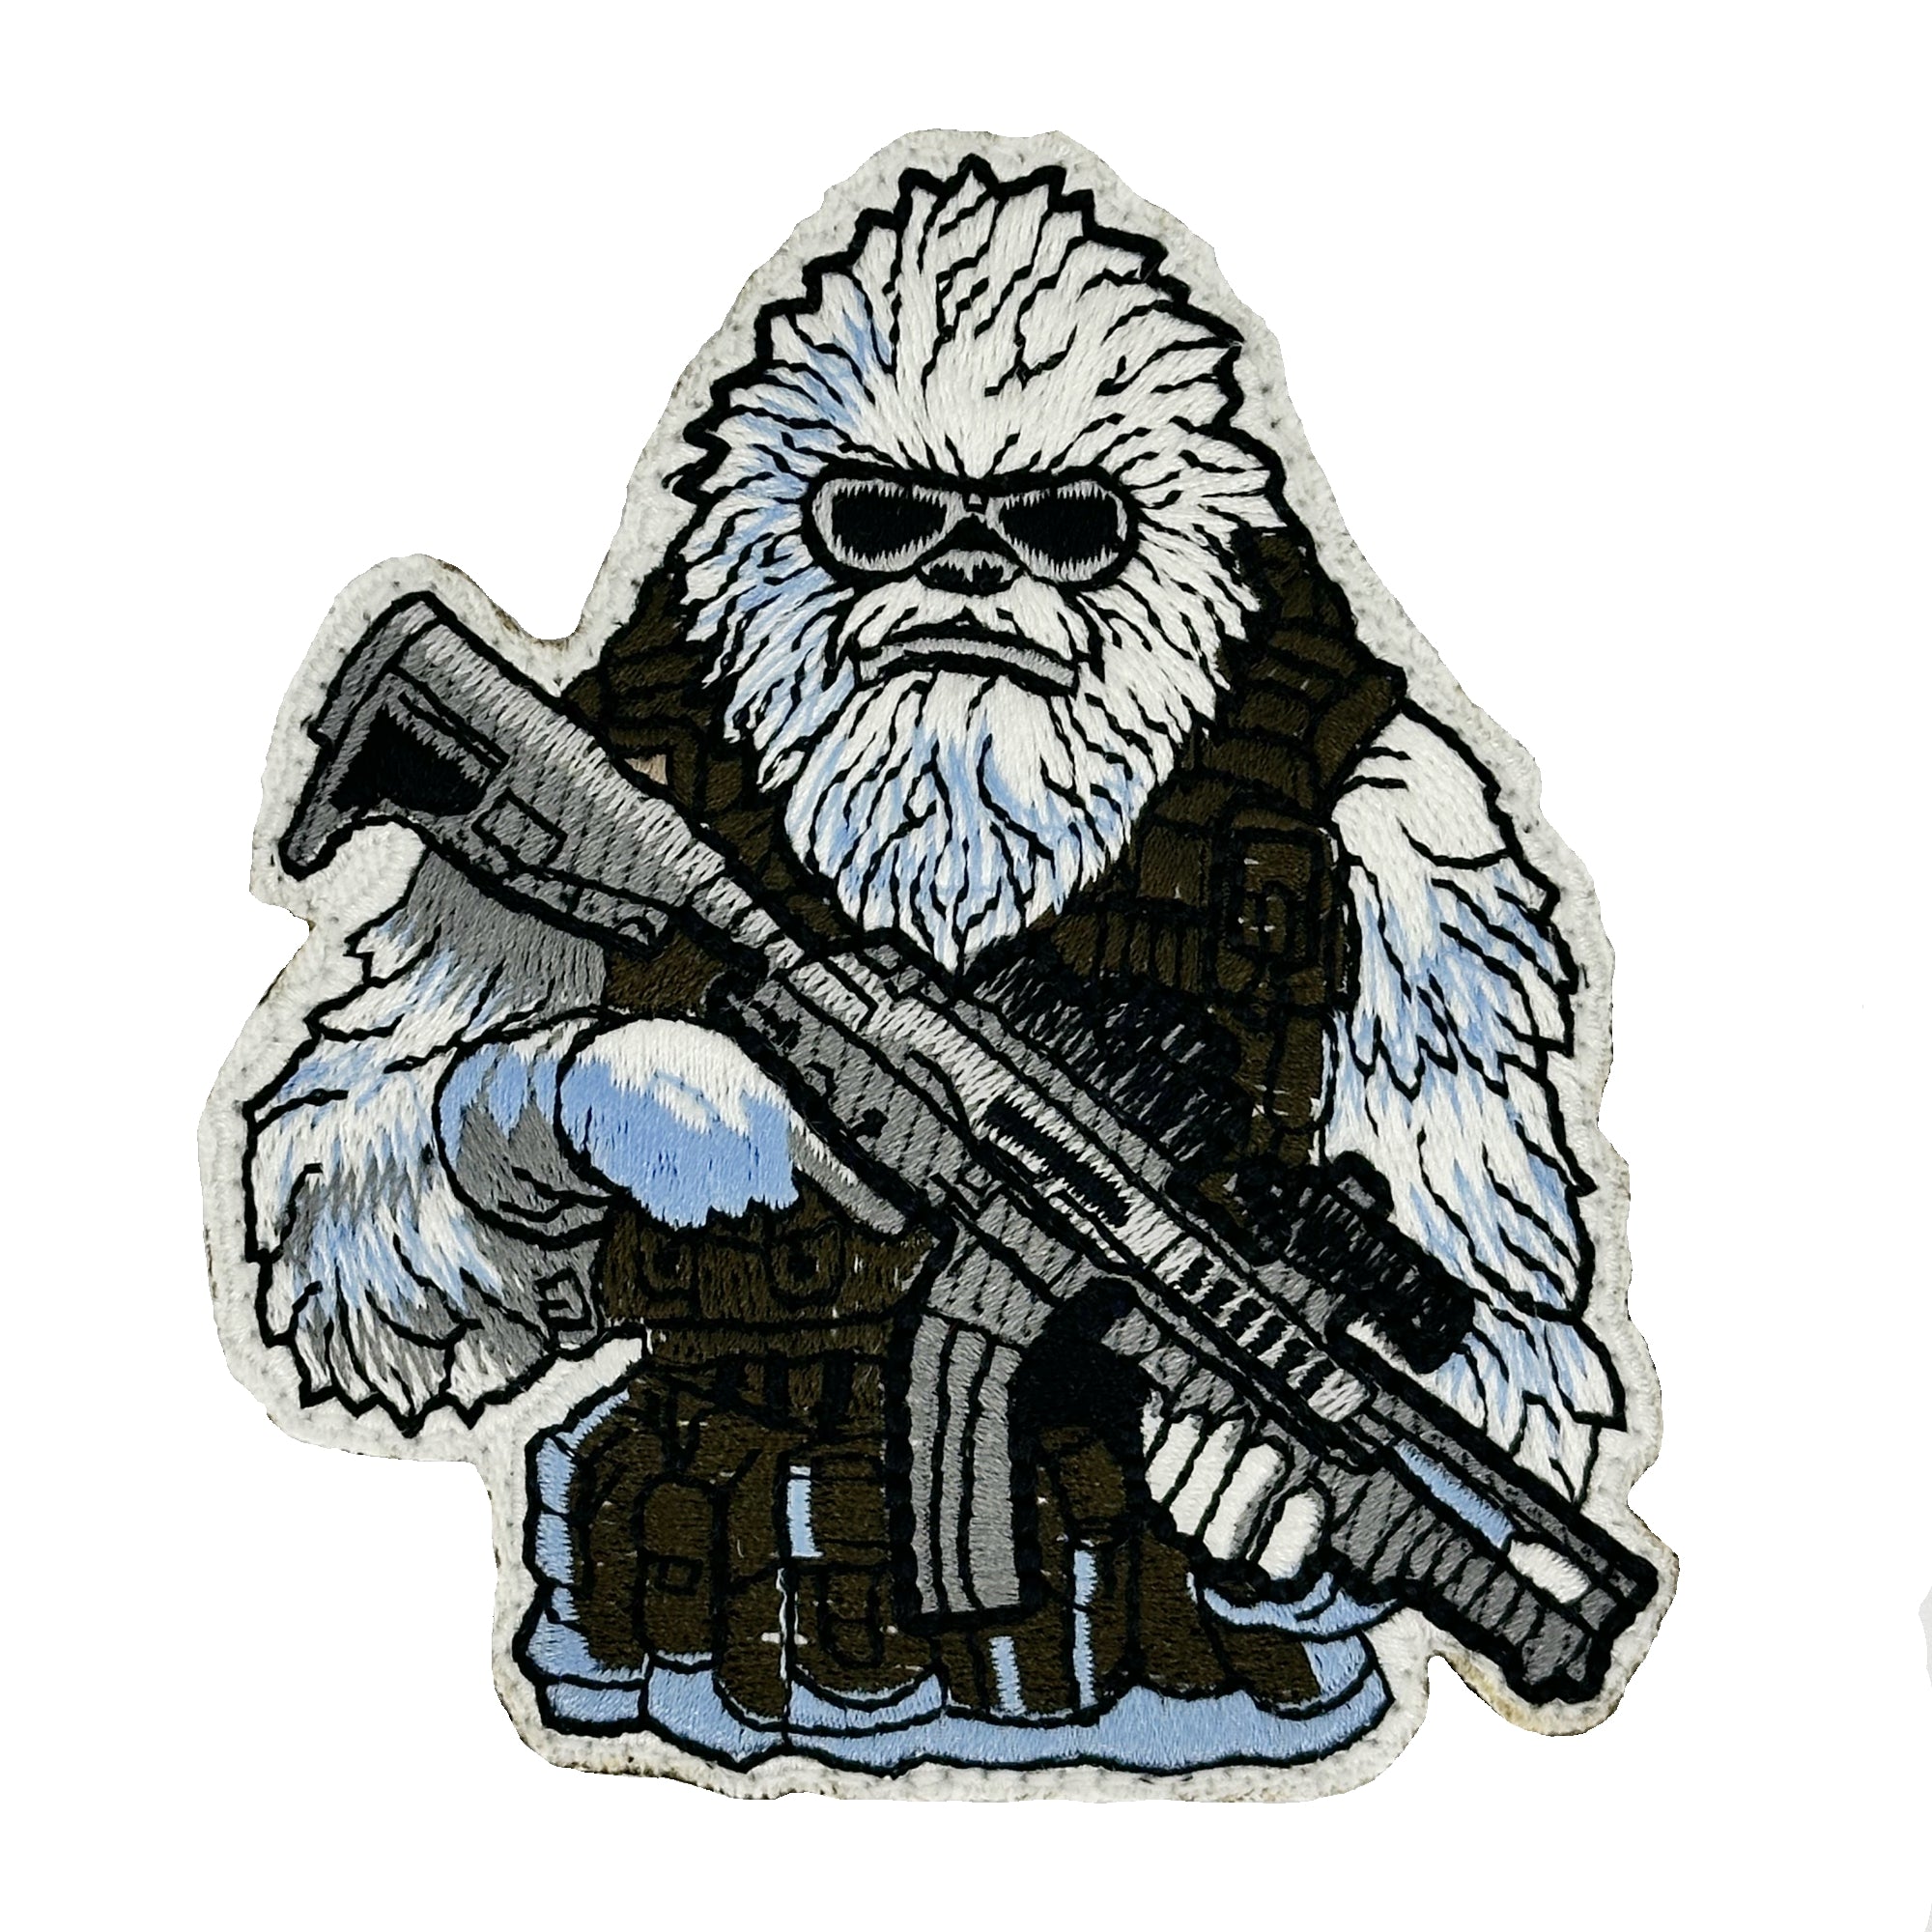 Abominable Snowman Tactical Yeti With AR-15 3.75" Fully Embroidered Patch